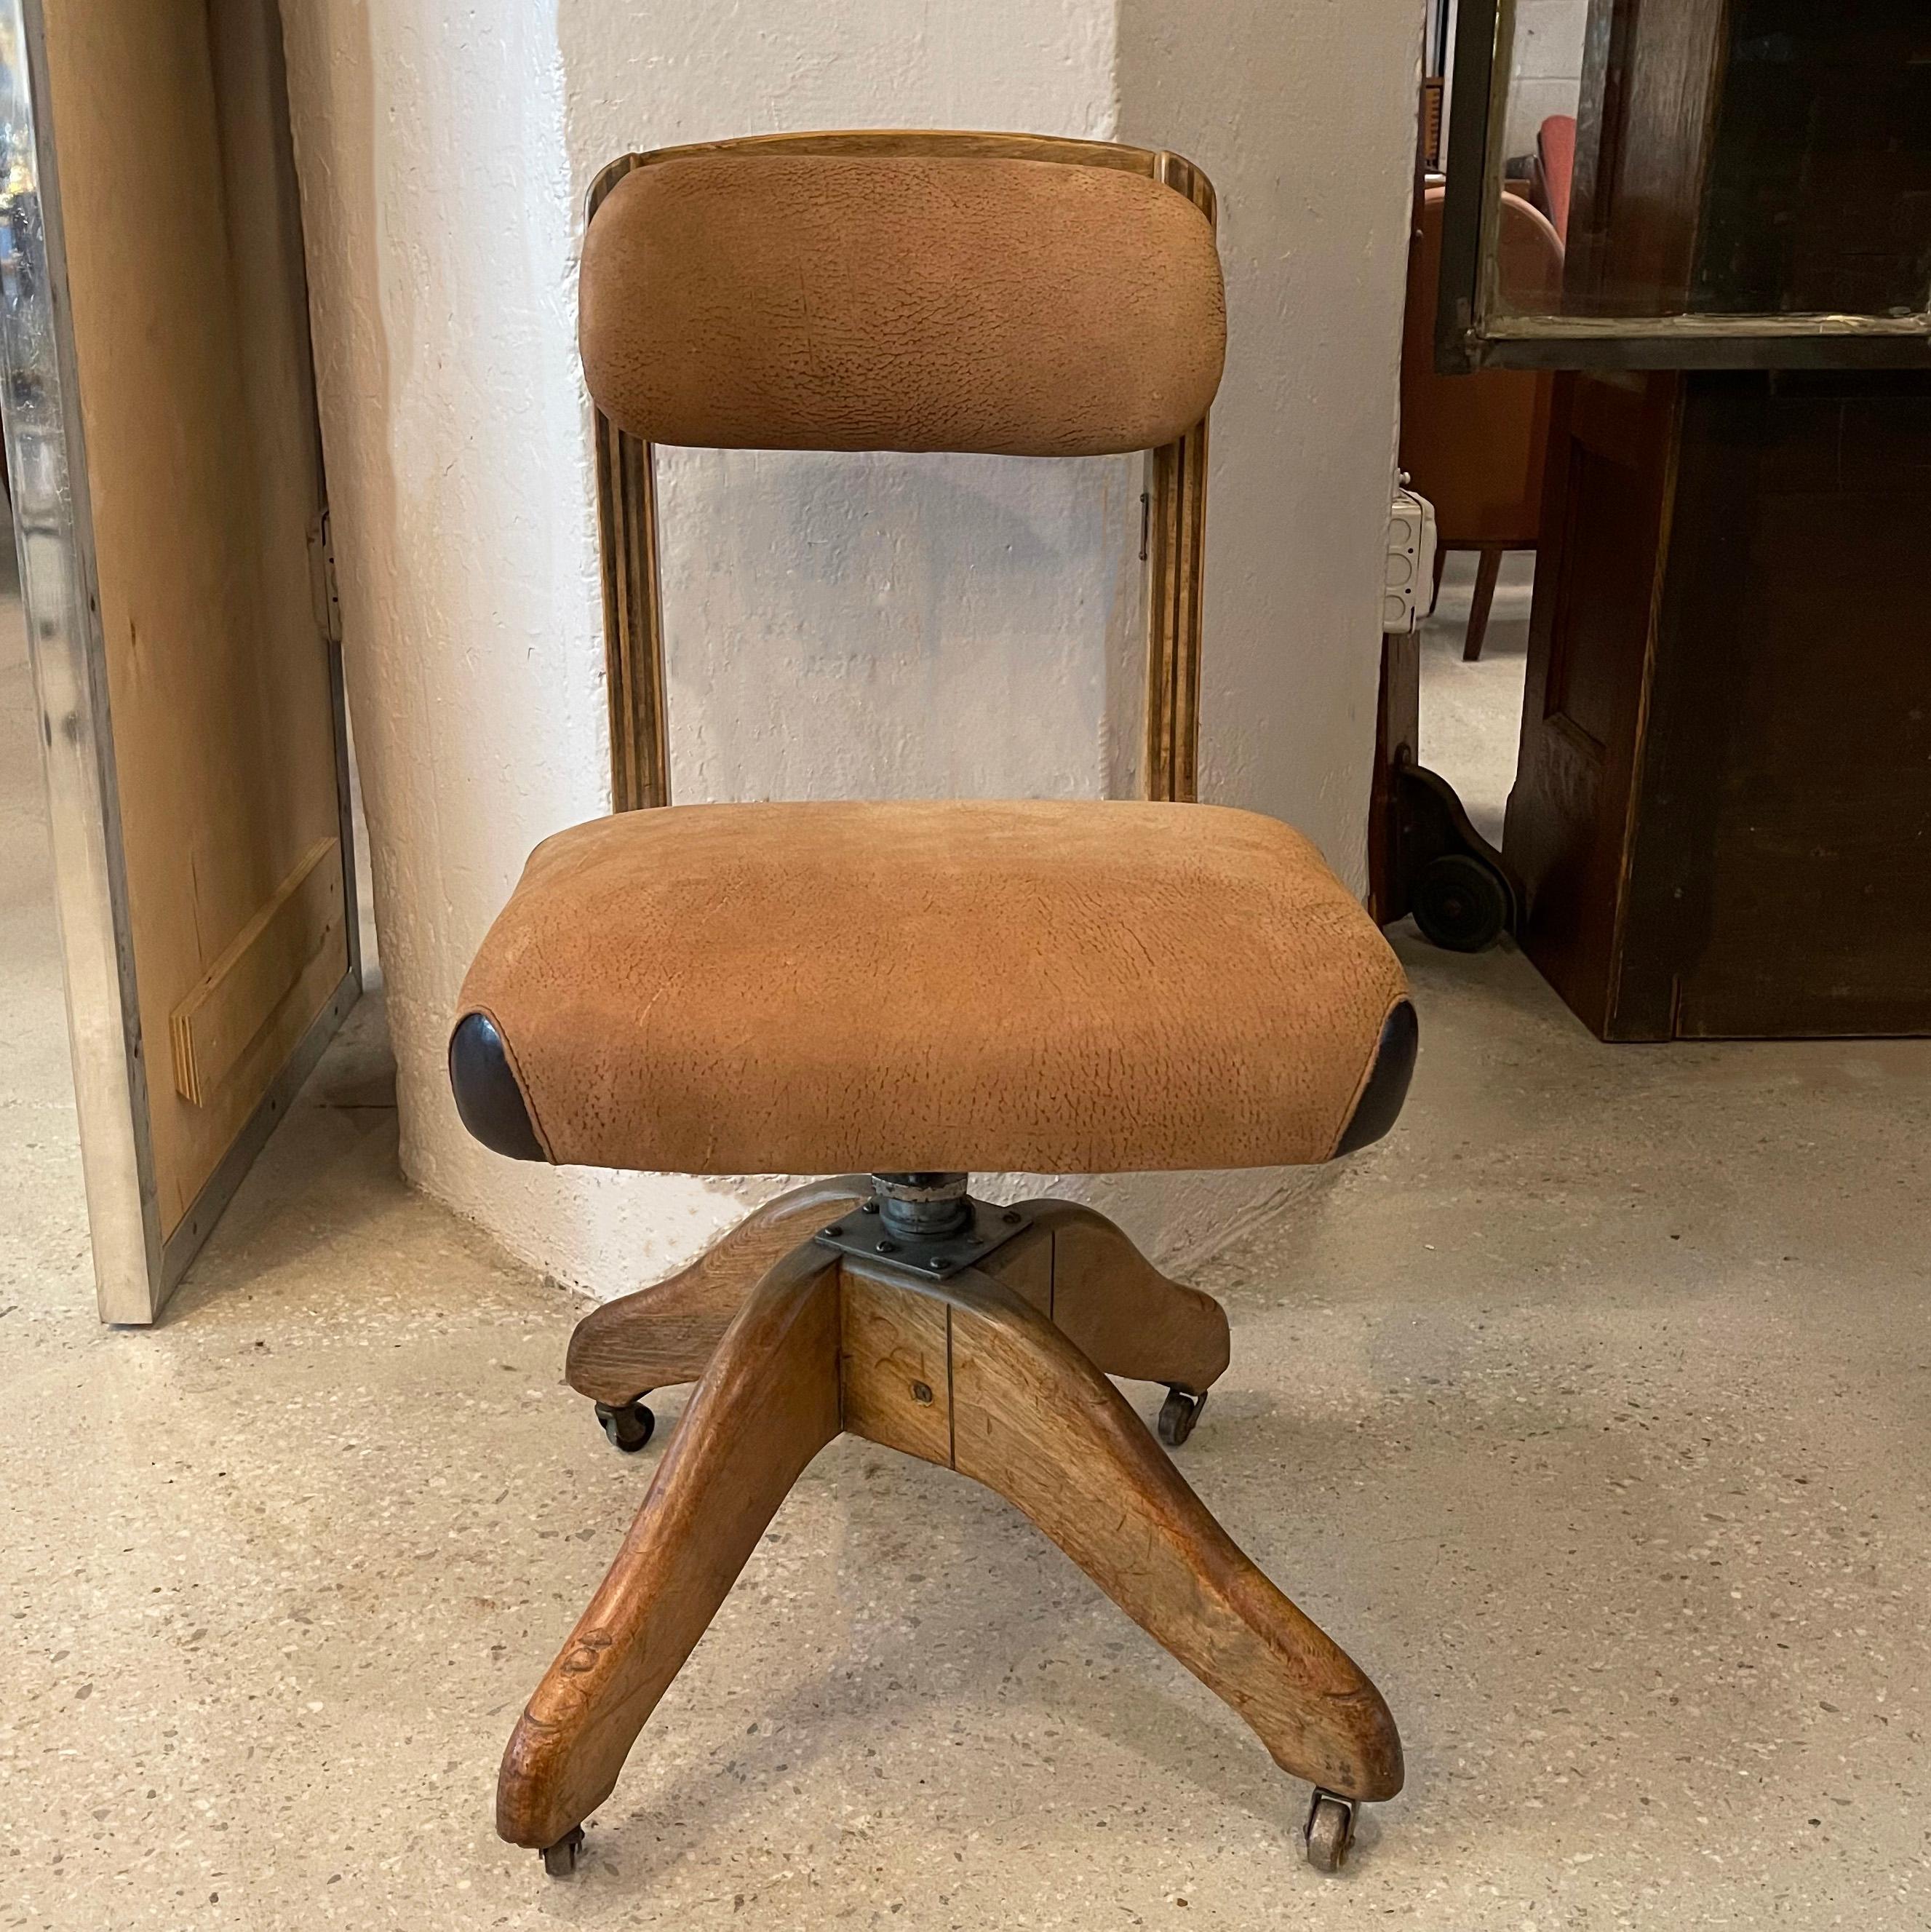 Industrial, midcentury, office desk chair by DoMore Chair Company features a height adjustable 17 - 19 inches, rolling, swivel oak frame with newly upholstered tan suede seat and back edged in contrasting brown leather.